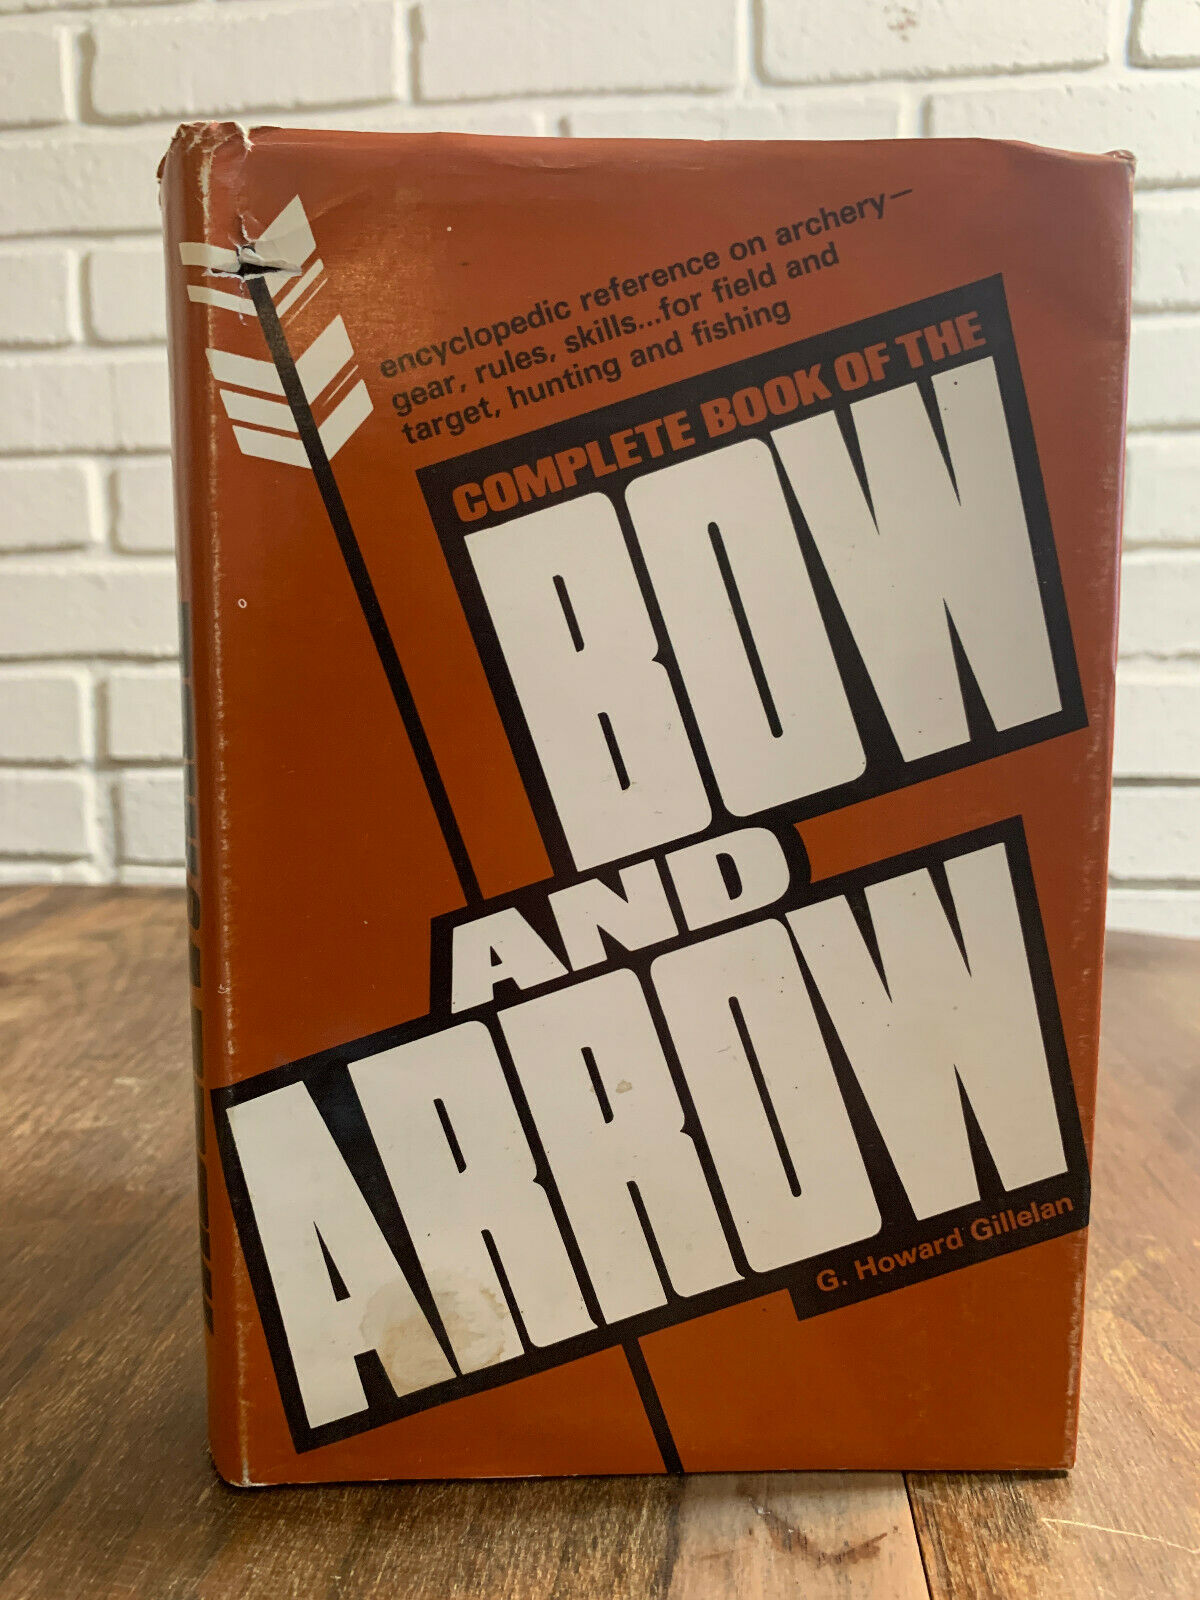 Complete Book of the Bow & Arrow by G. Howard Gillelan, 1971